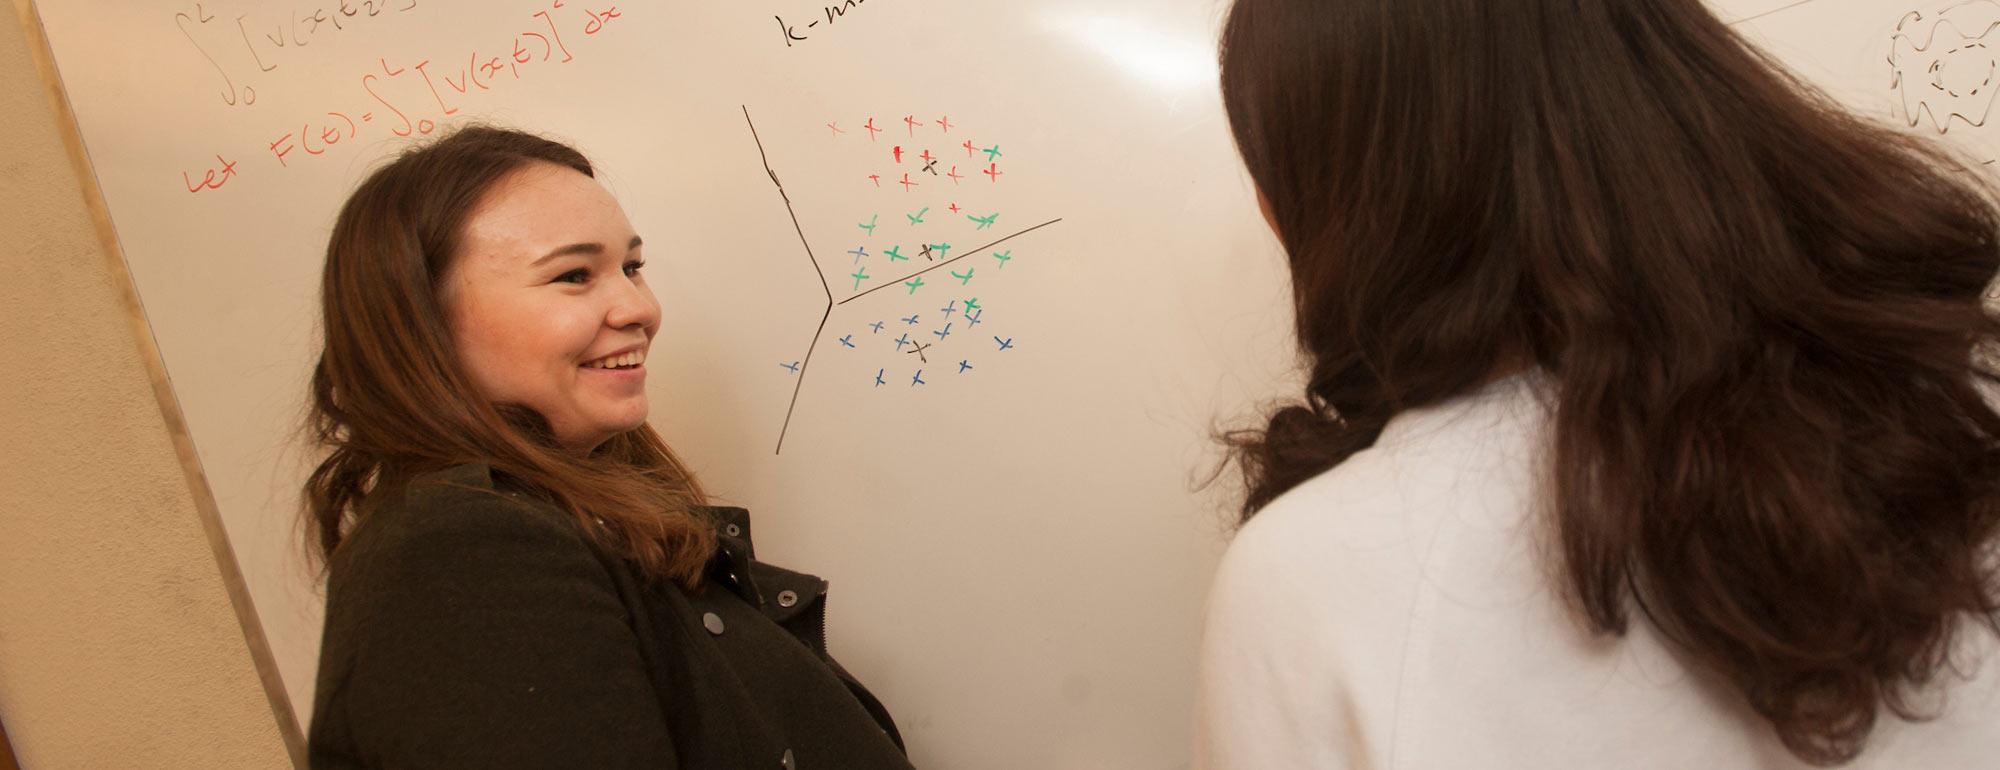 Two female students discuss a math problem at a whiteboard